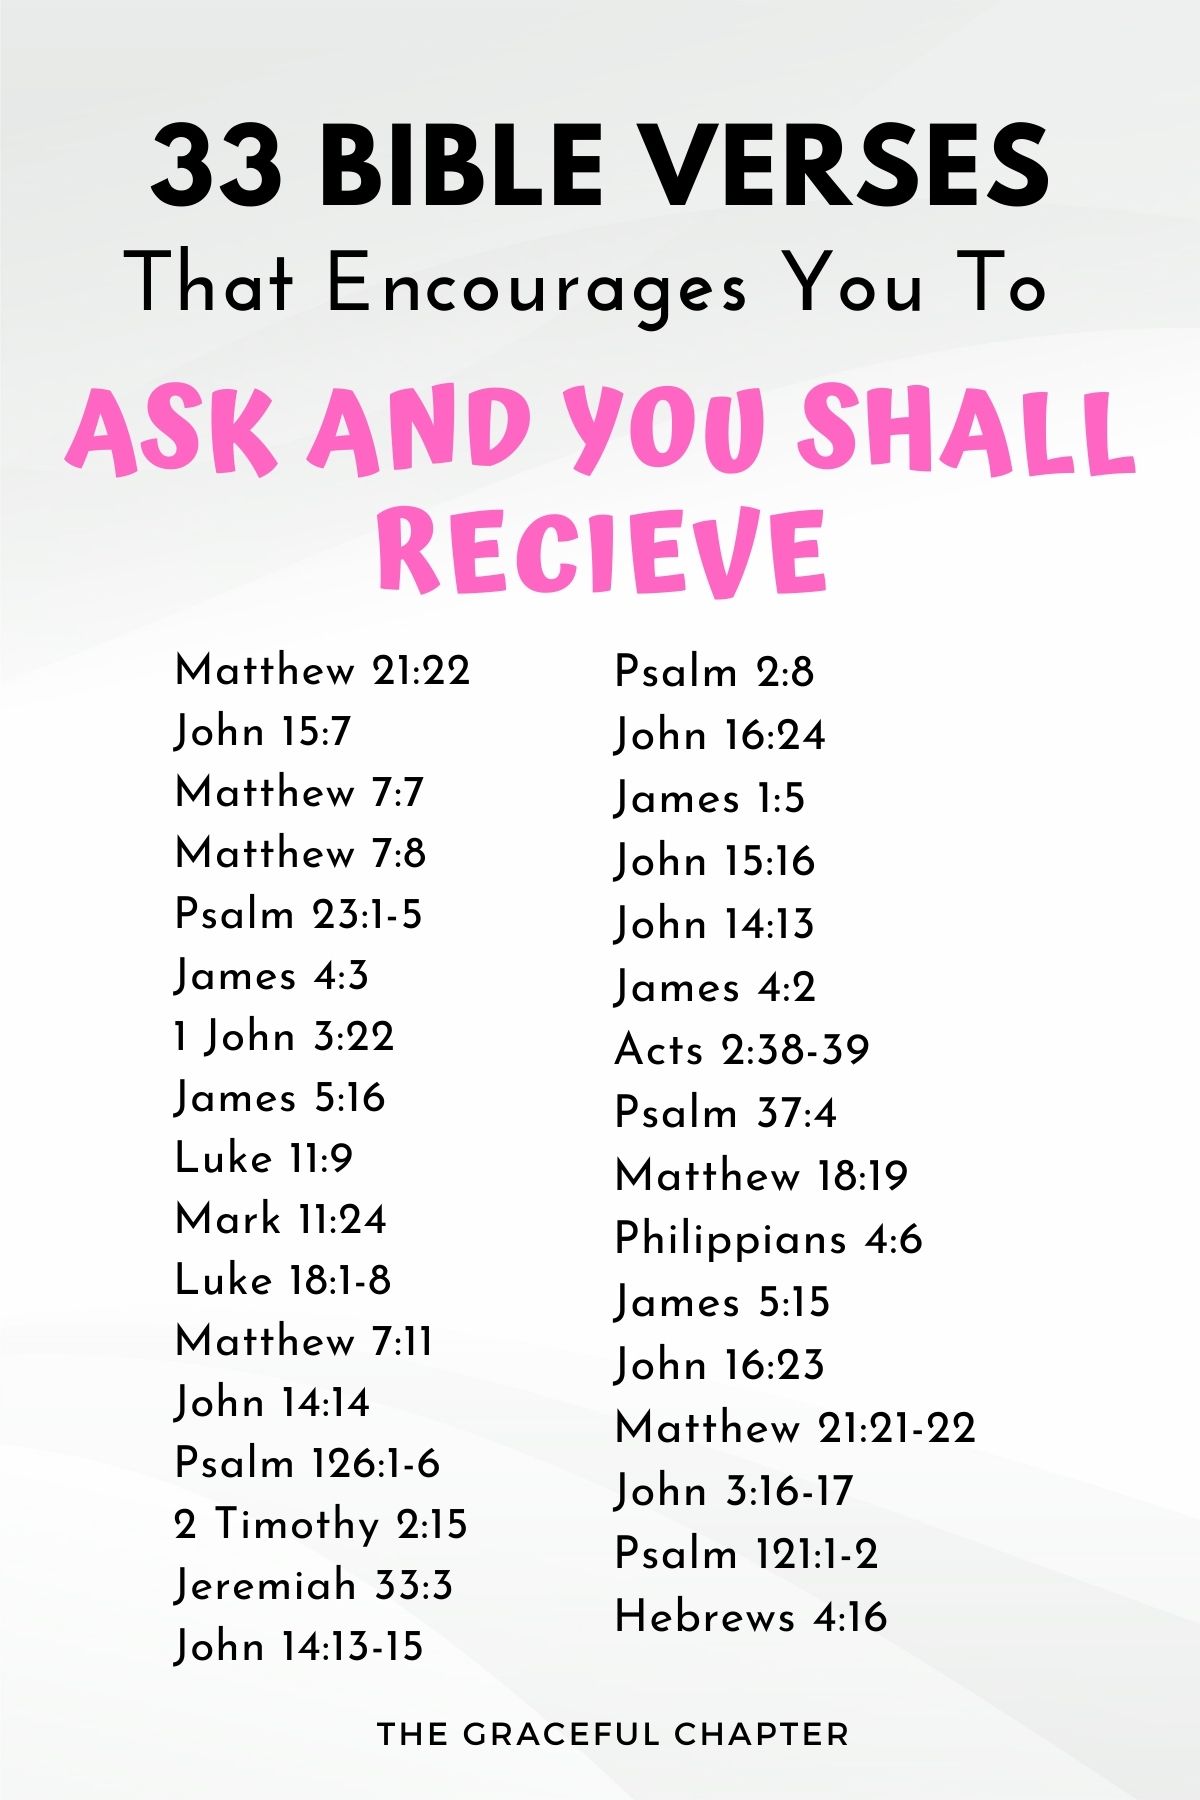 33 bible verses that encourage you to ask and you shall receive